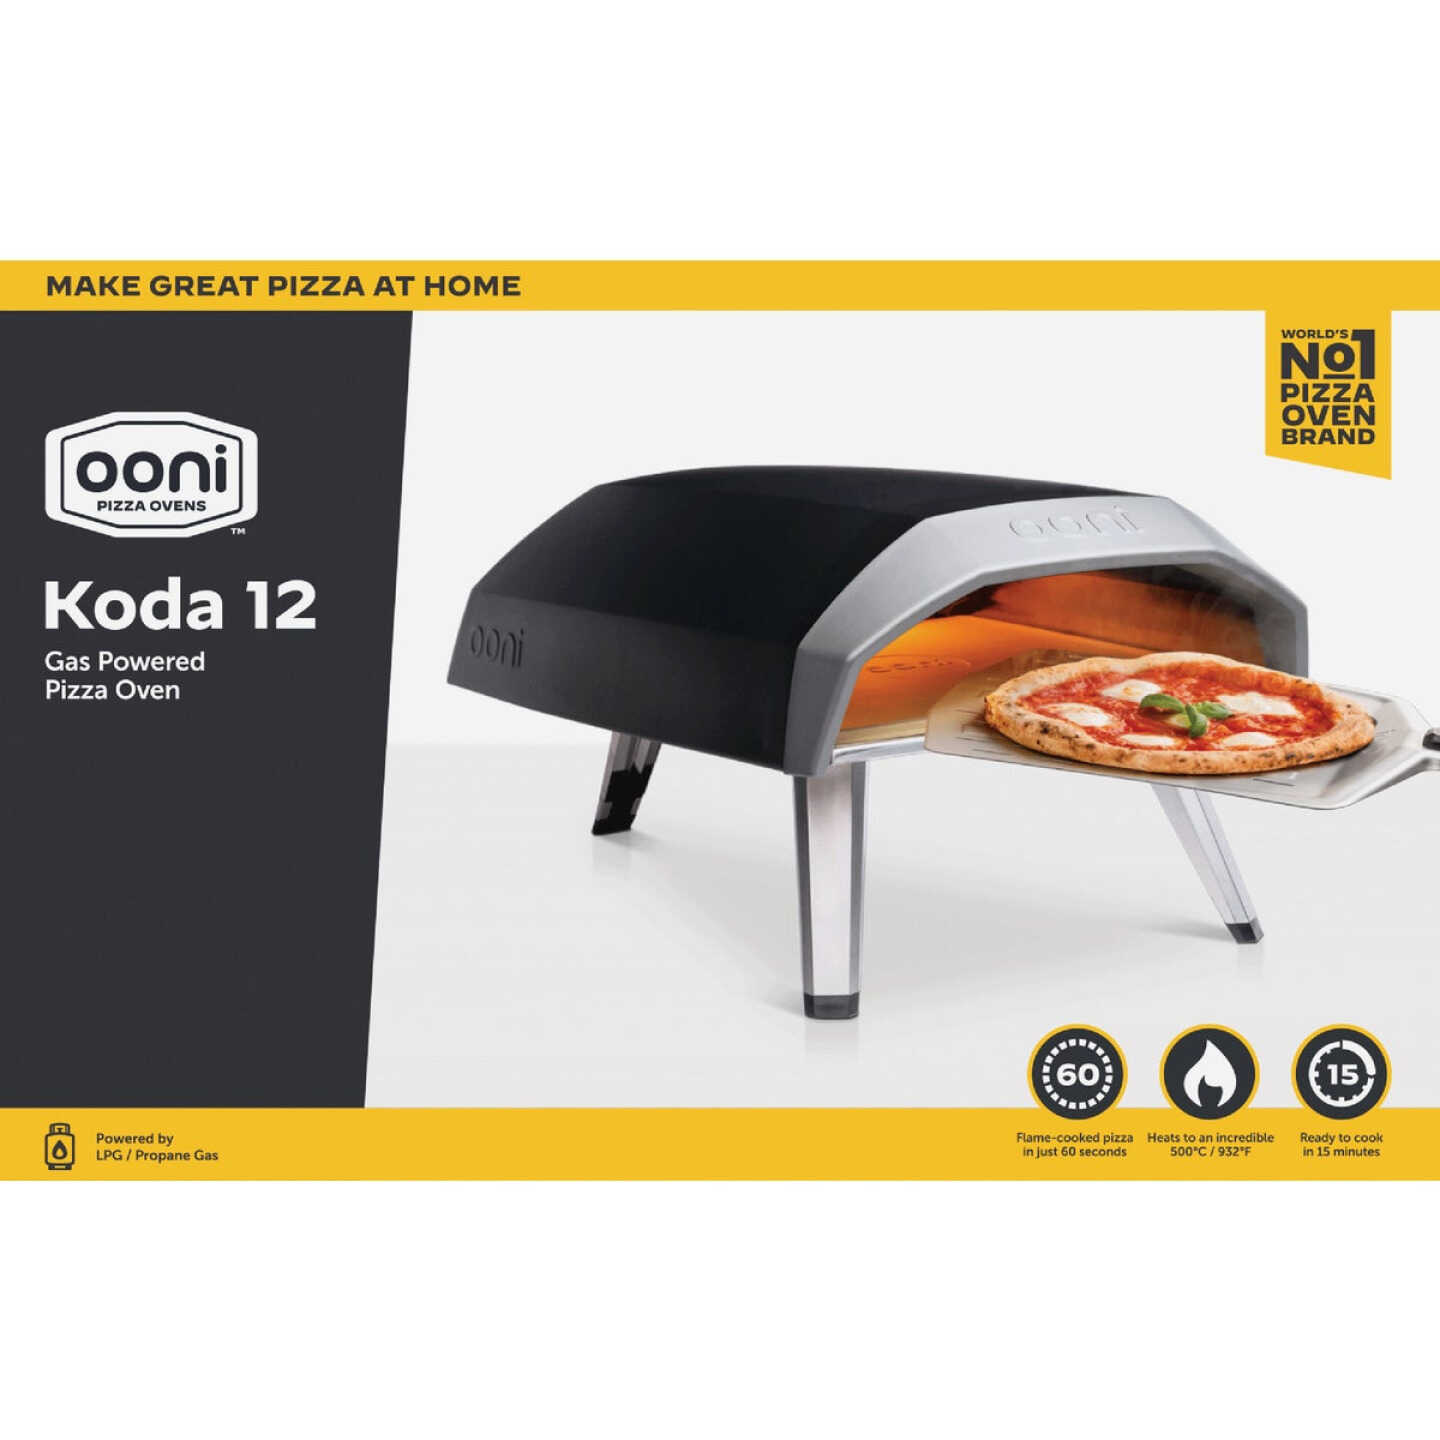 12 Must-Have Ooni Pizza Oven Accessories - Drizzle Me Skinny!